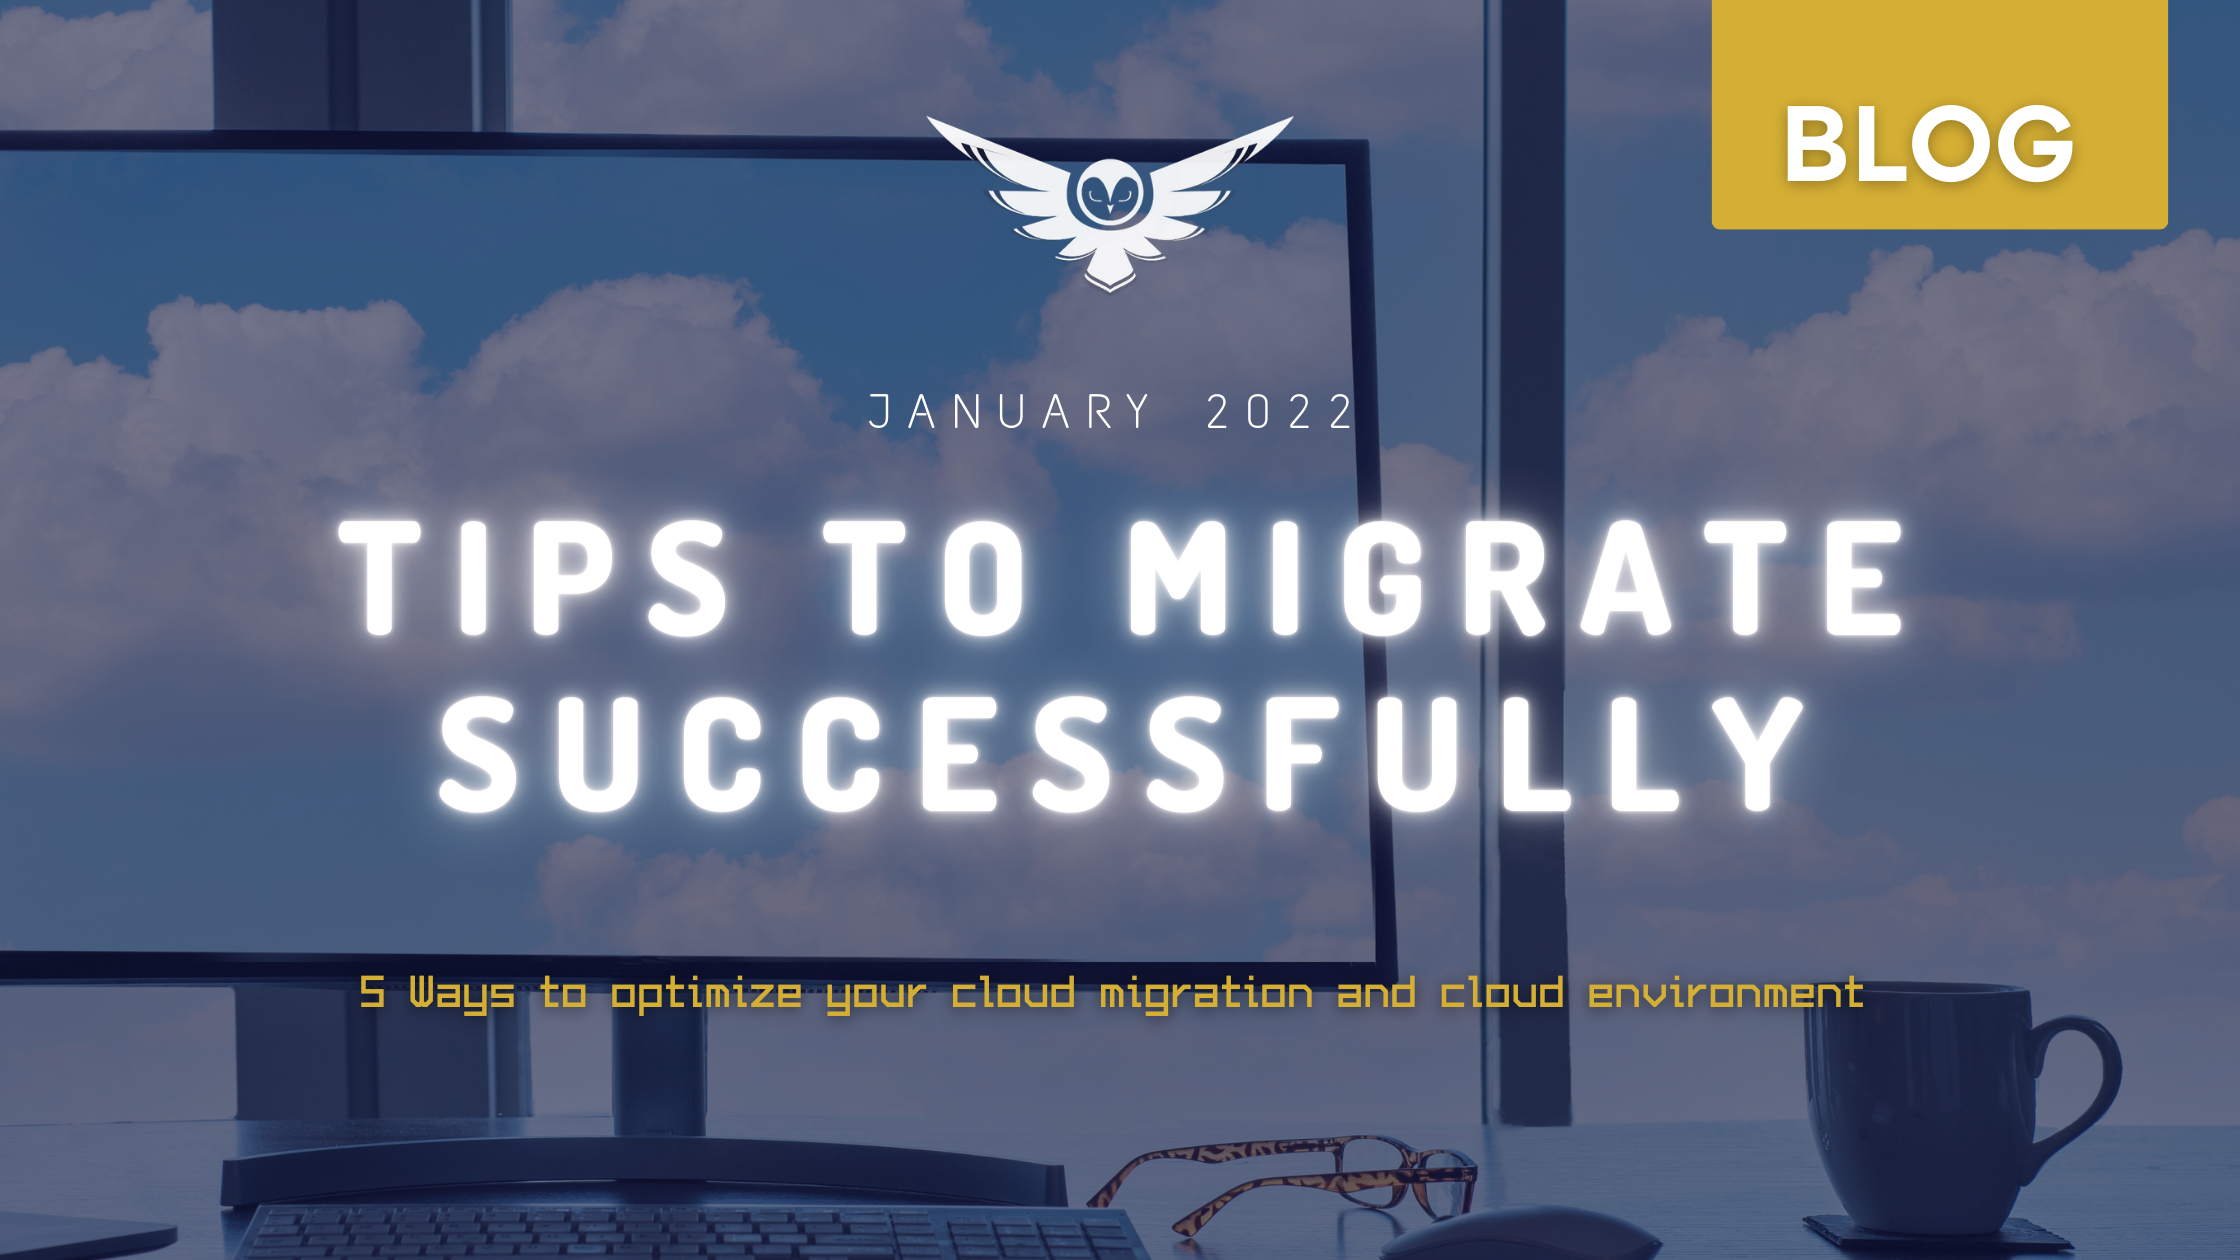 Tips to Migrate Successfully